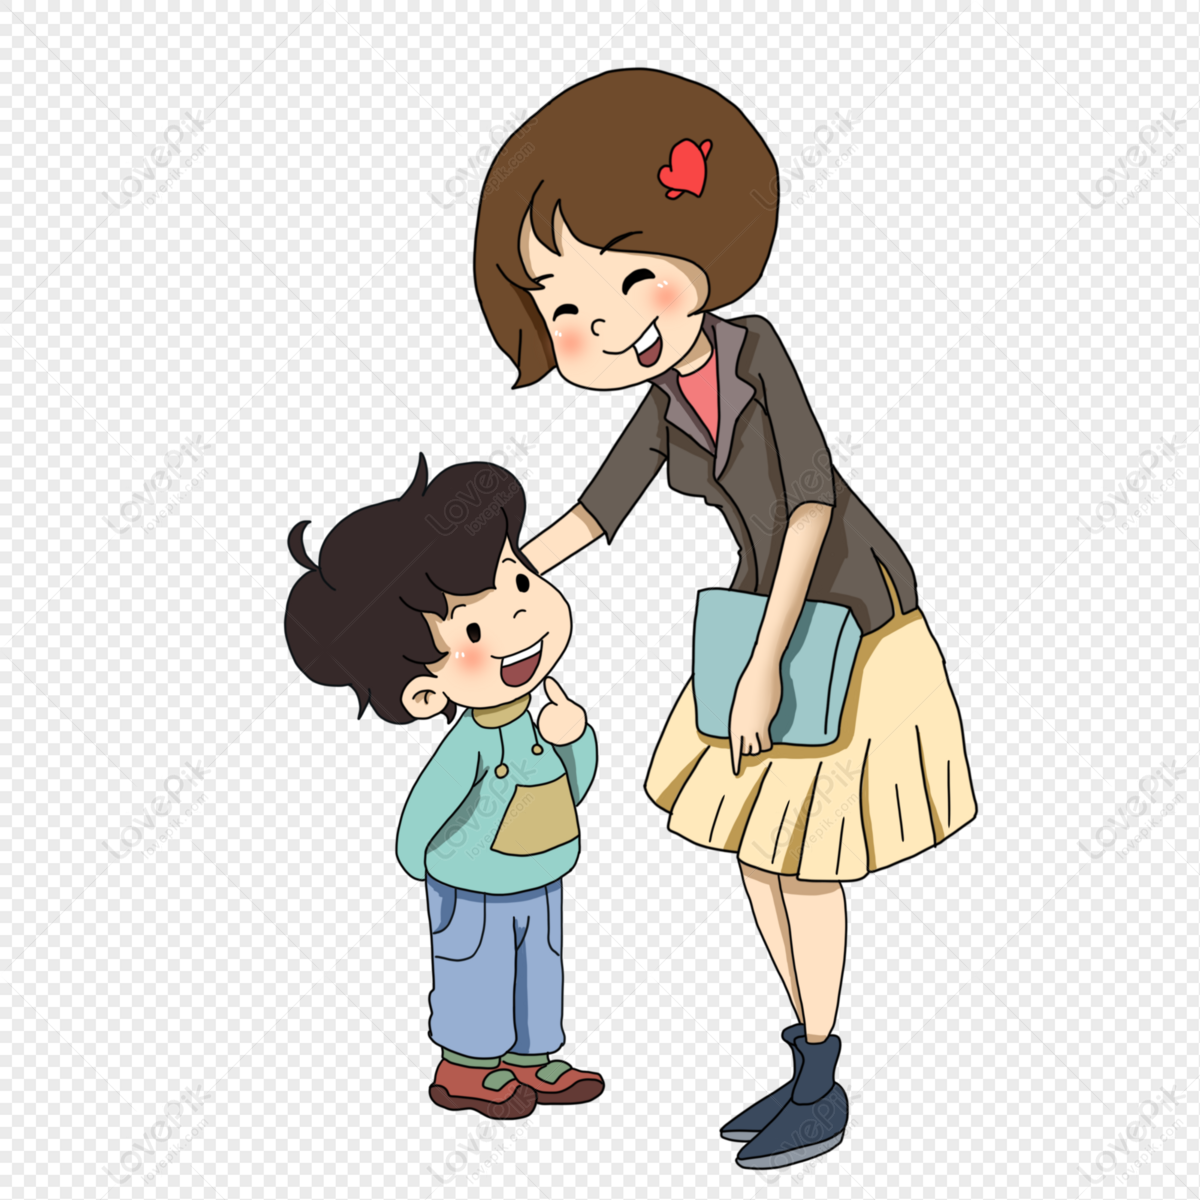 Teachers Day Teacher And Student PNG Transparent And Clipart Image For Free  Download - Lovepik | 401422196